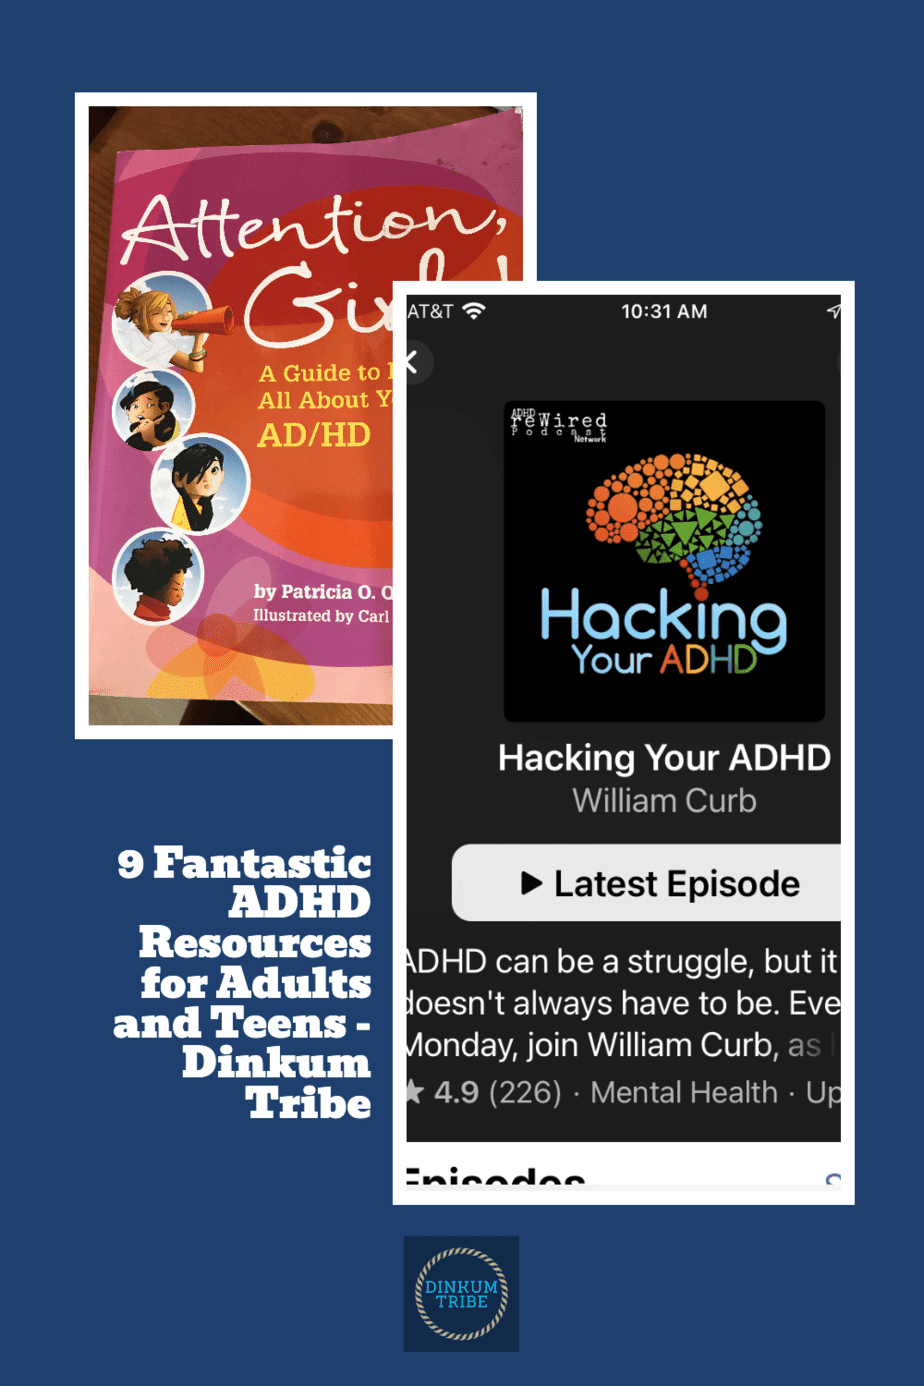 Pinnable collage for ADHD resources